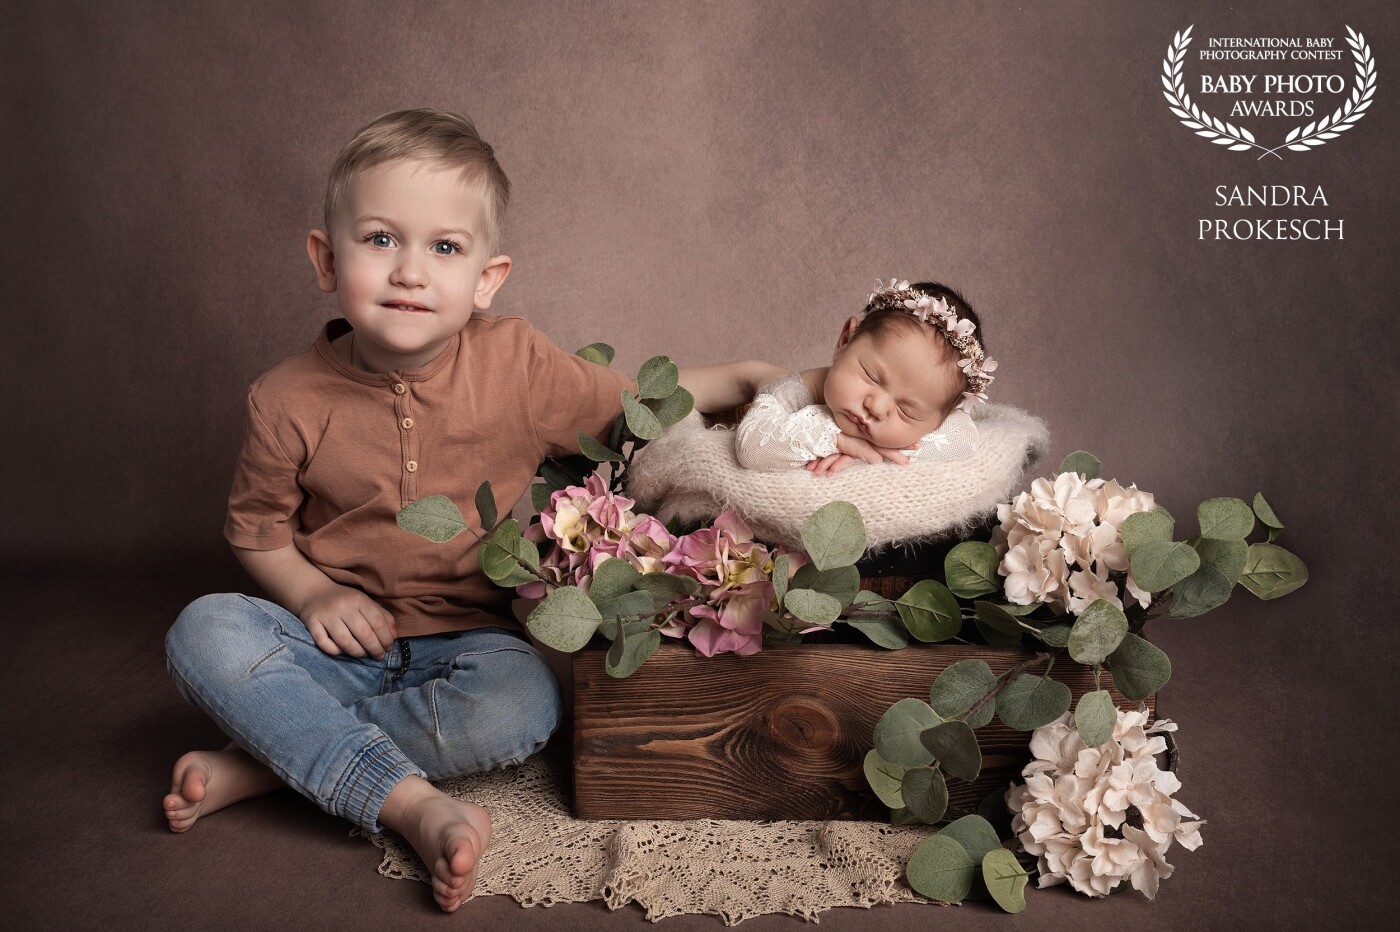 This little girl was so golden, she slept so beautifully all the time that I managed to take so many beautiful photos. Her big proud brother was also amazing. Working with him was so easy. I really enjoyed the whole photoshoot and was able to present me new props and outfits.